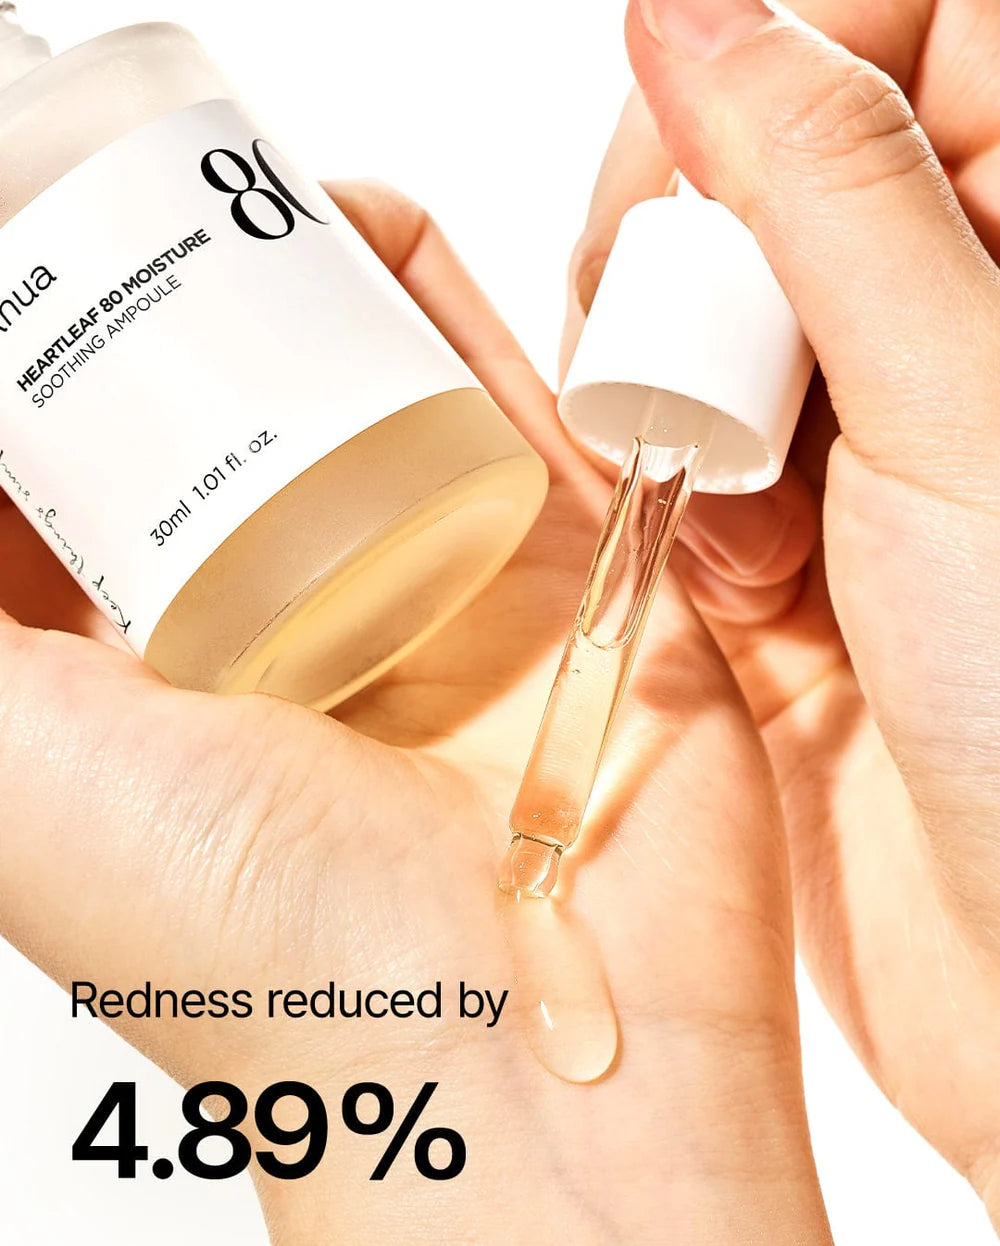 HEARTLEAF 80% MOISTURE SOOTHING AMPOULE